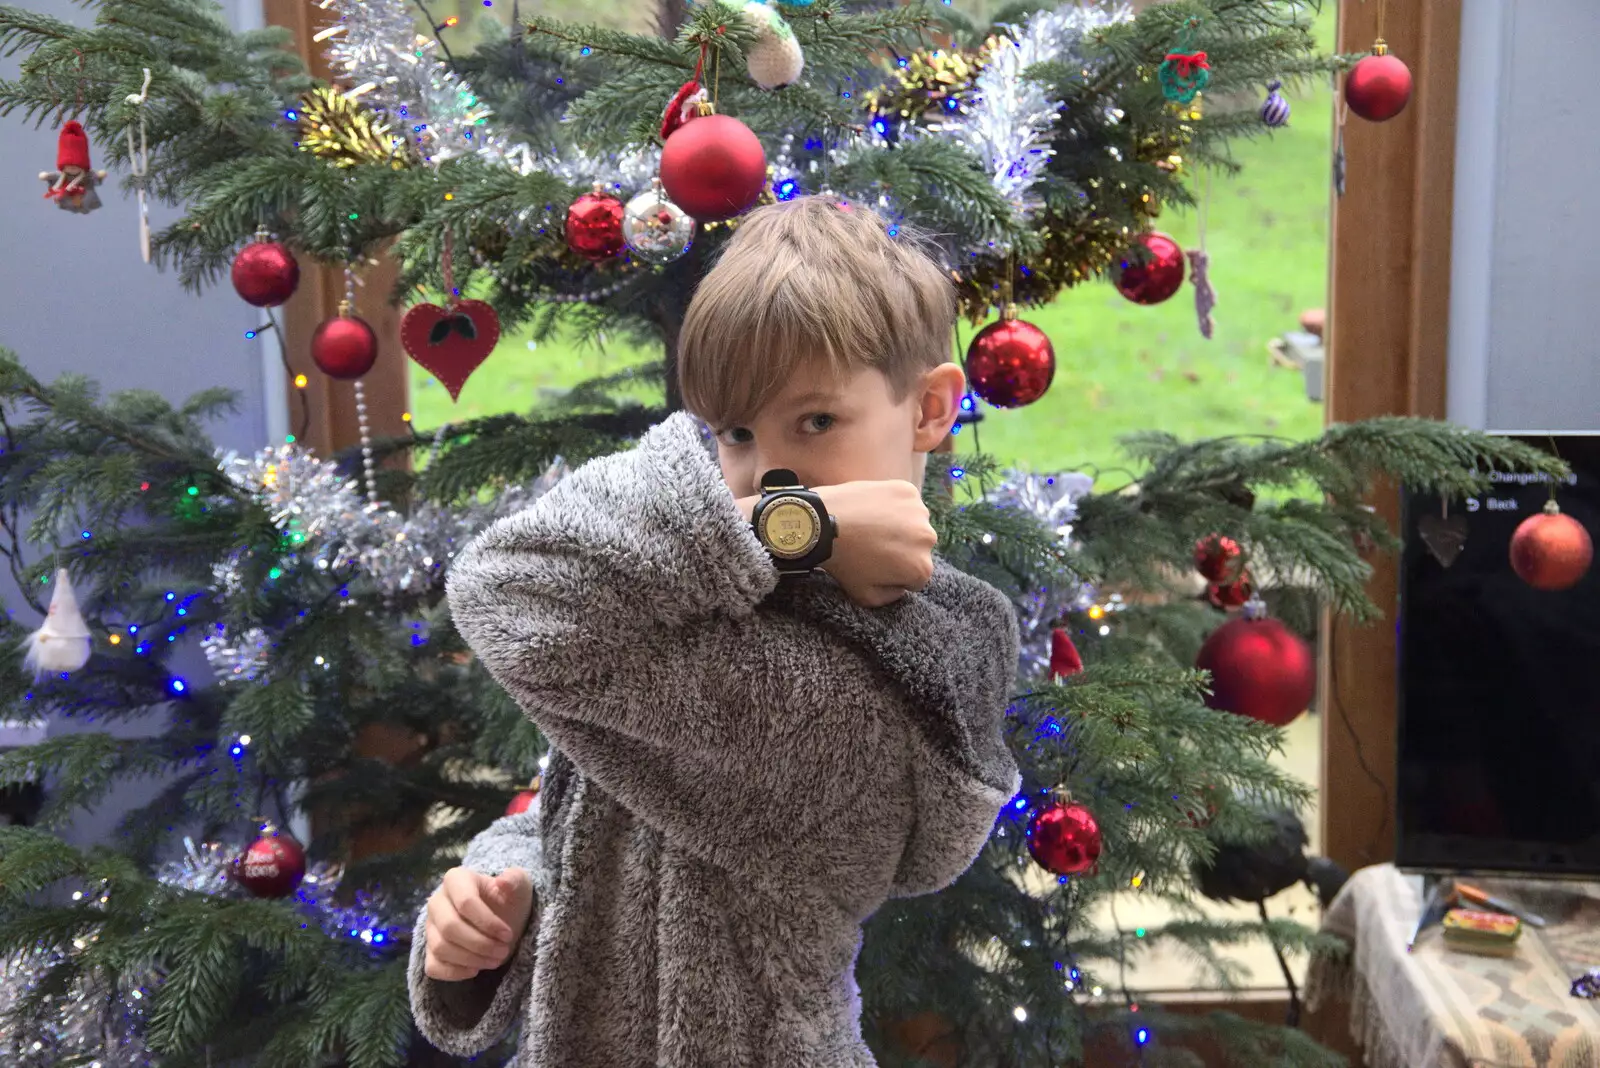 Harry shows off his new Harry Potter watch, from Christmas Day at Home, Brome, Suffolk - 25th December 2021